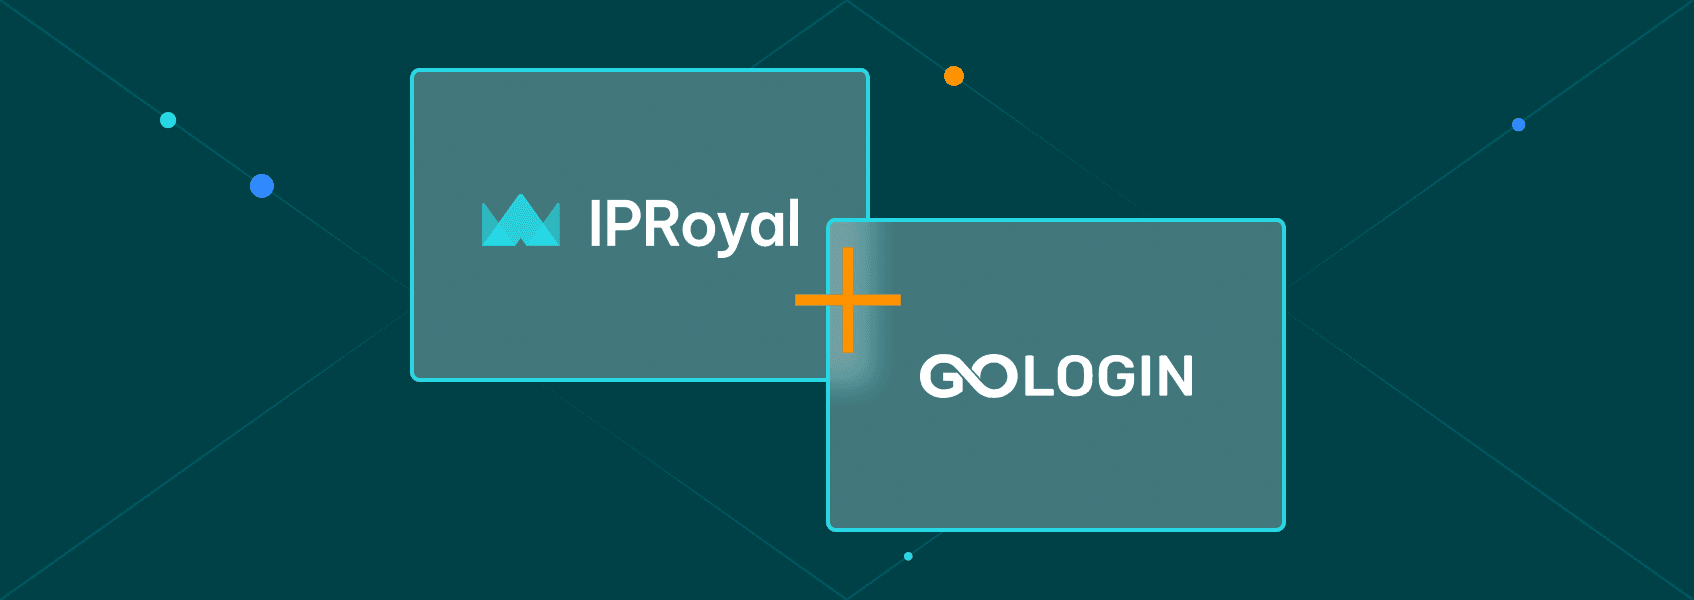 how to set up a GoLogin proxy with IPRoyal